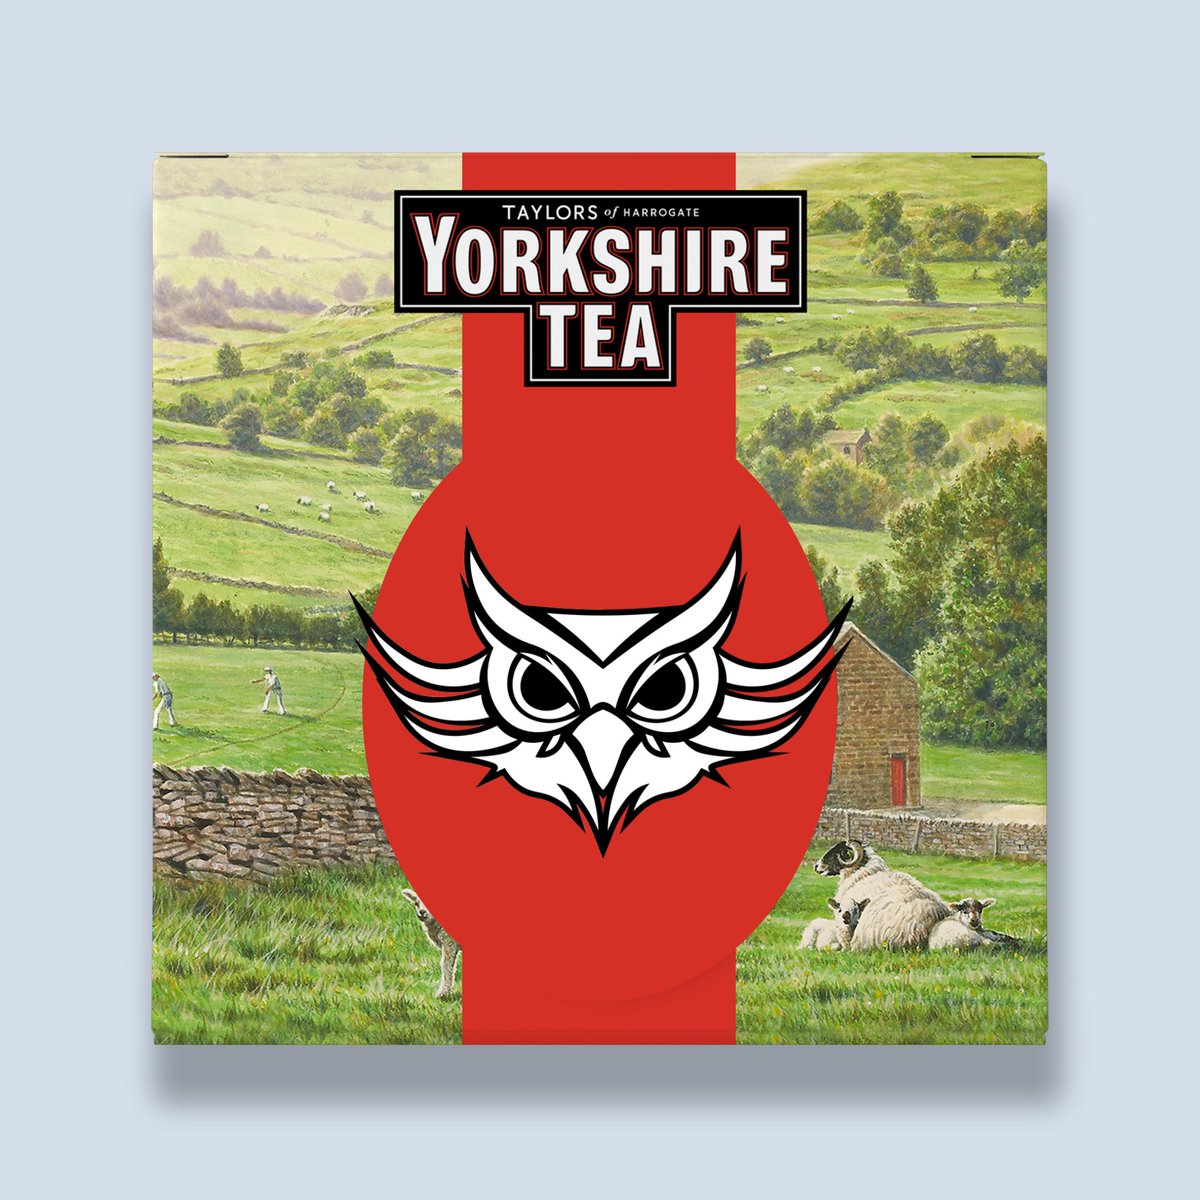 We have BIG news! Since attending @IGFestUK we can finally announce... We have a new partnership! 🫖 @YorkshireTea 🫖 We are so thrilled that we're having our own Owls-inspired Tea!🦉 👉Twilight Owl Tea! Read the full article here! 👉t.ly/PKjYN